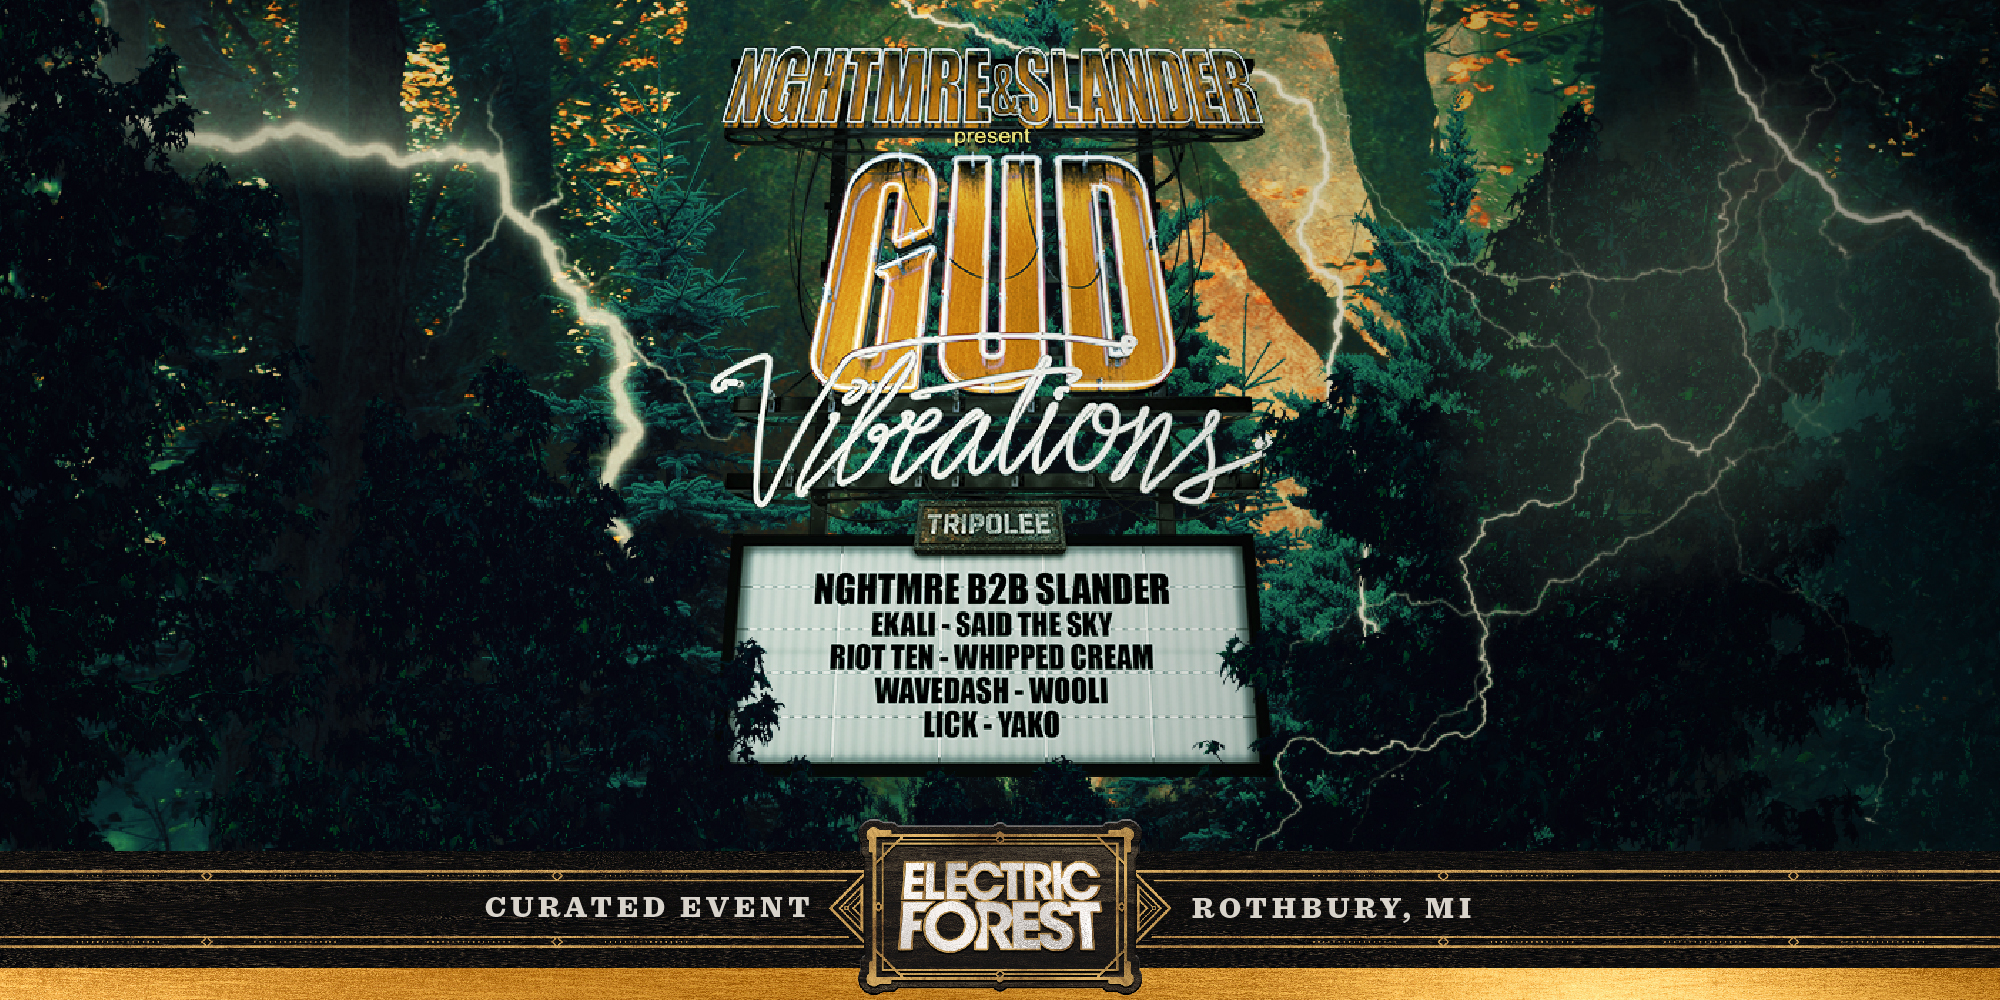 Electric Forest 2019 Gud Vibrations